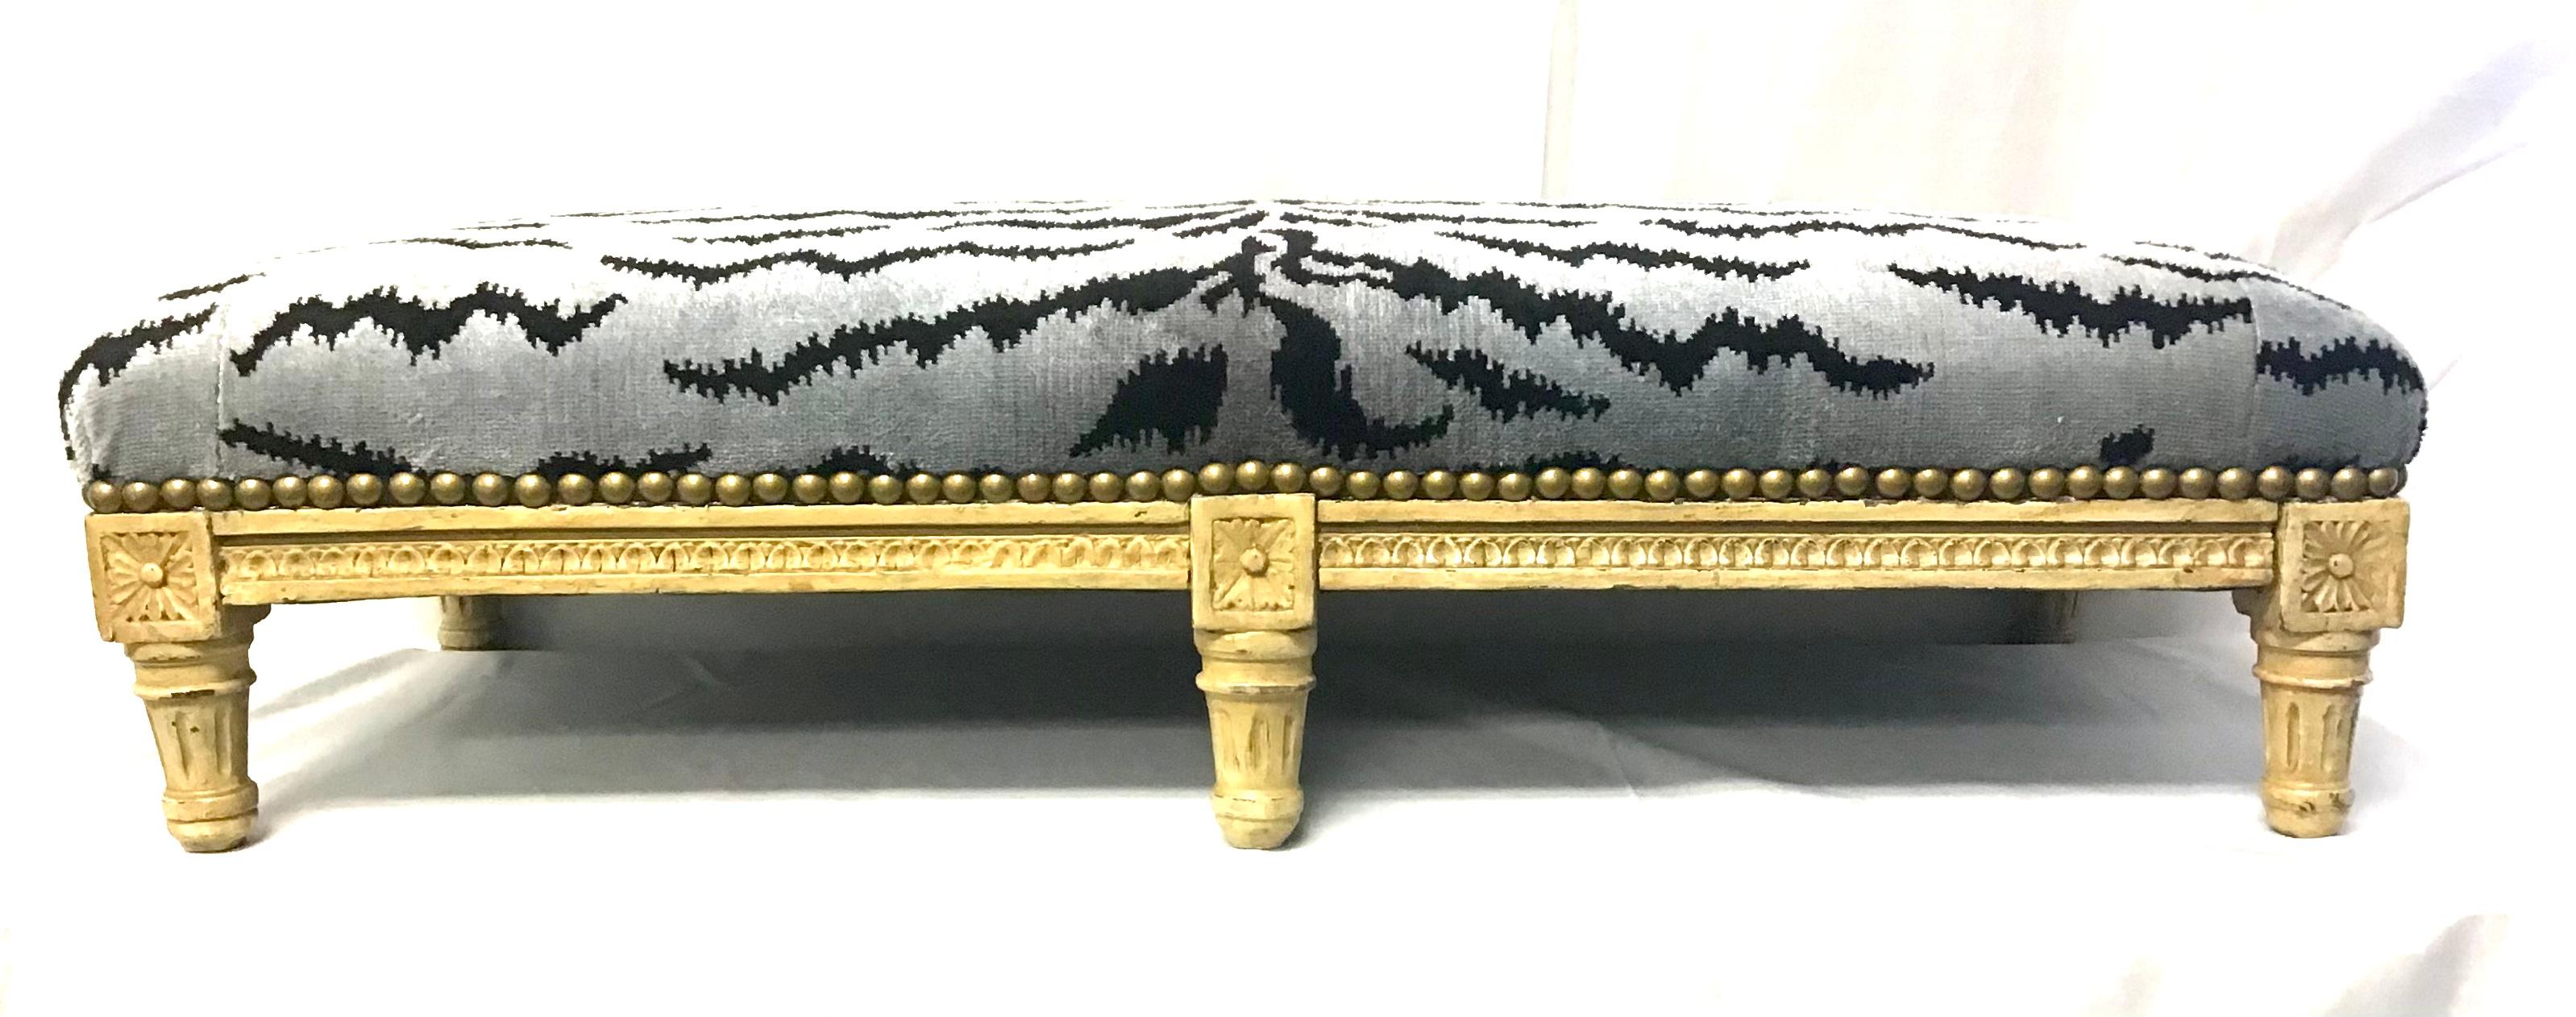 Louis XVI style carved and painted wood banquette/bench, 19th century Classic French design, great proportions and good condition. Squared Rosette, fluted, rounded tapered legs and covered in Scalamandre with brass tacks. Wonderfully worn painted